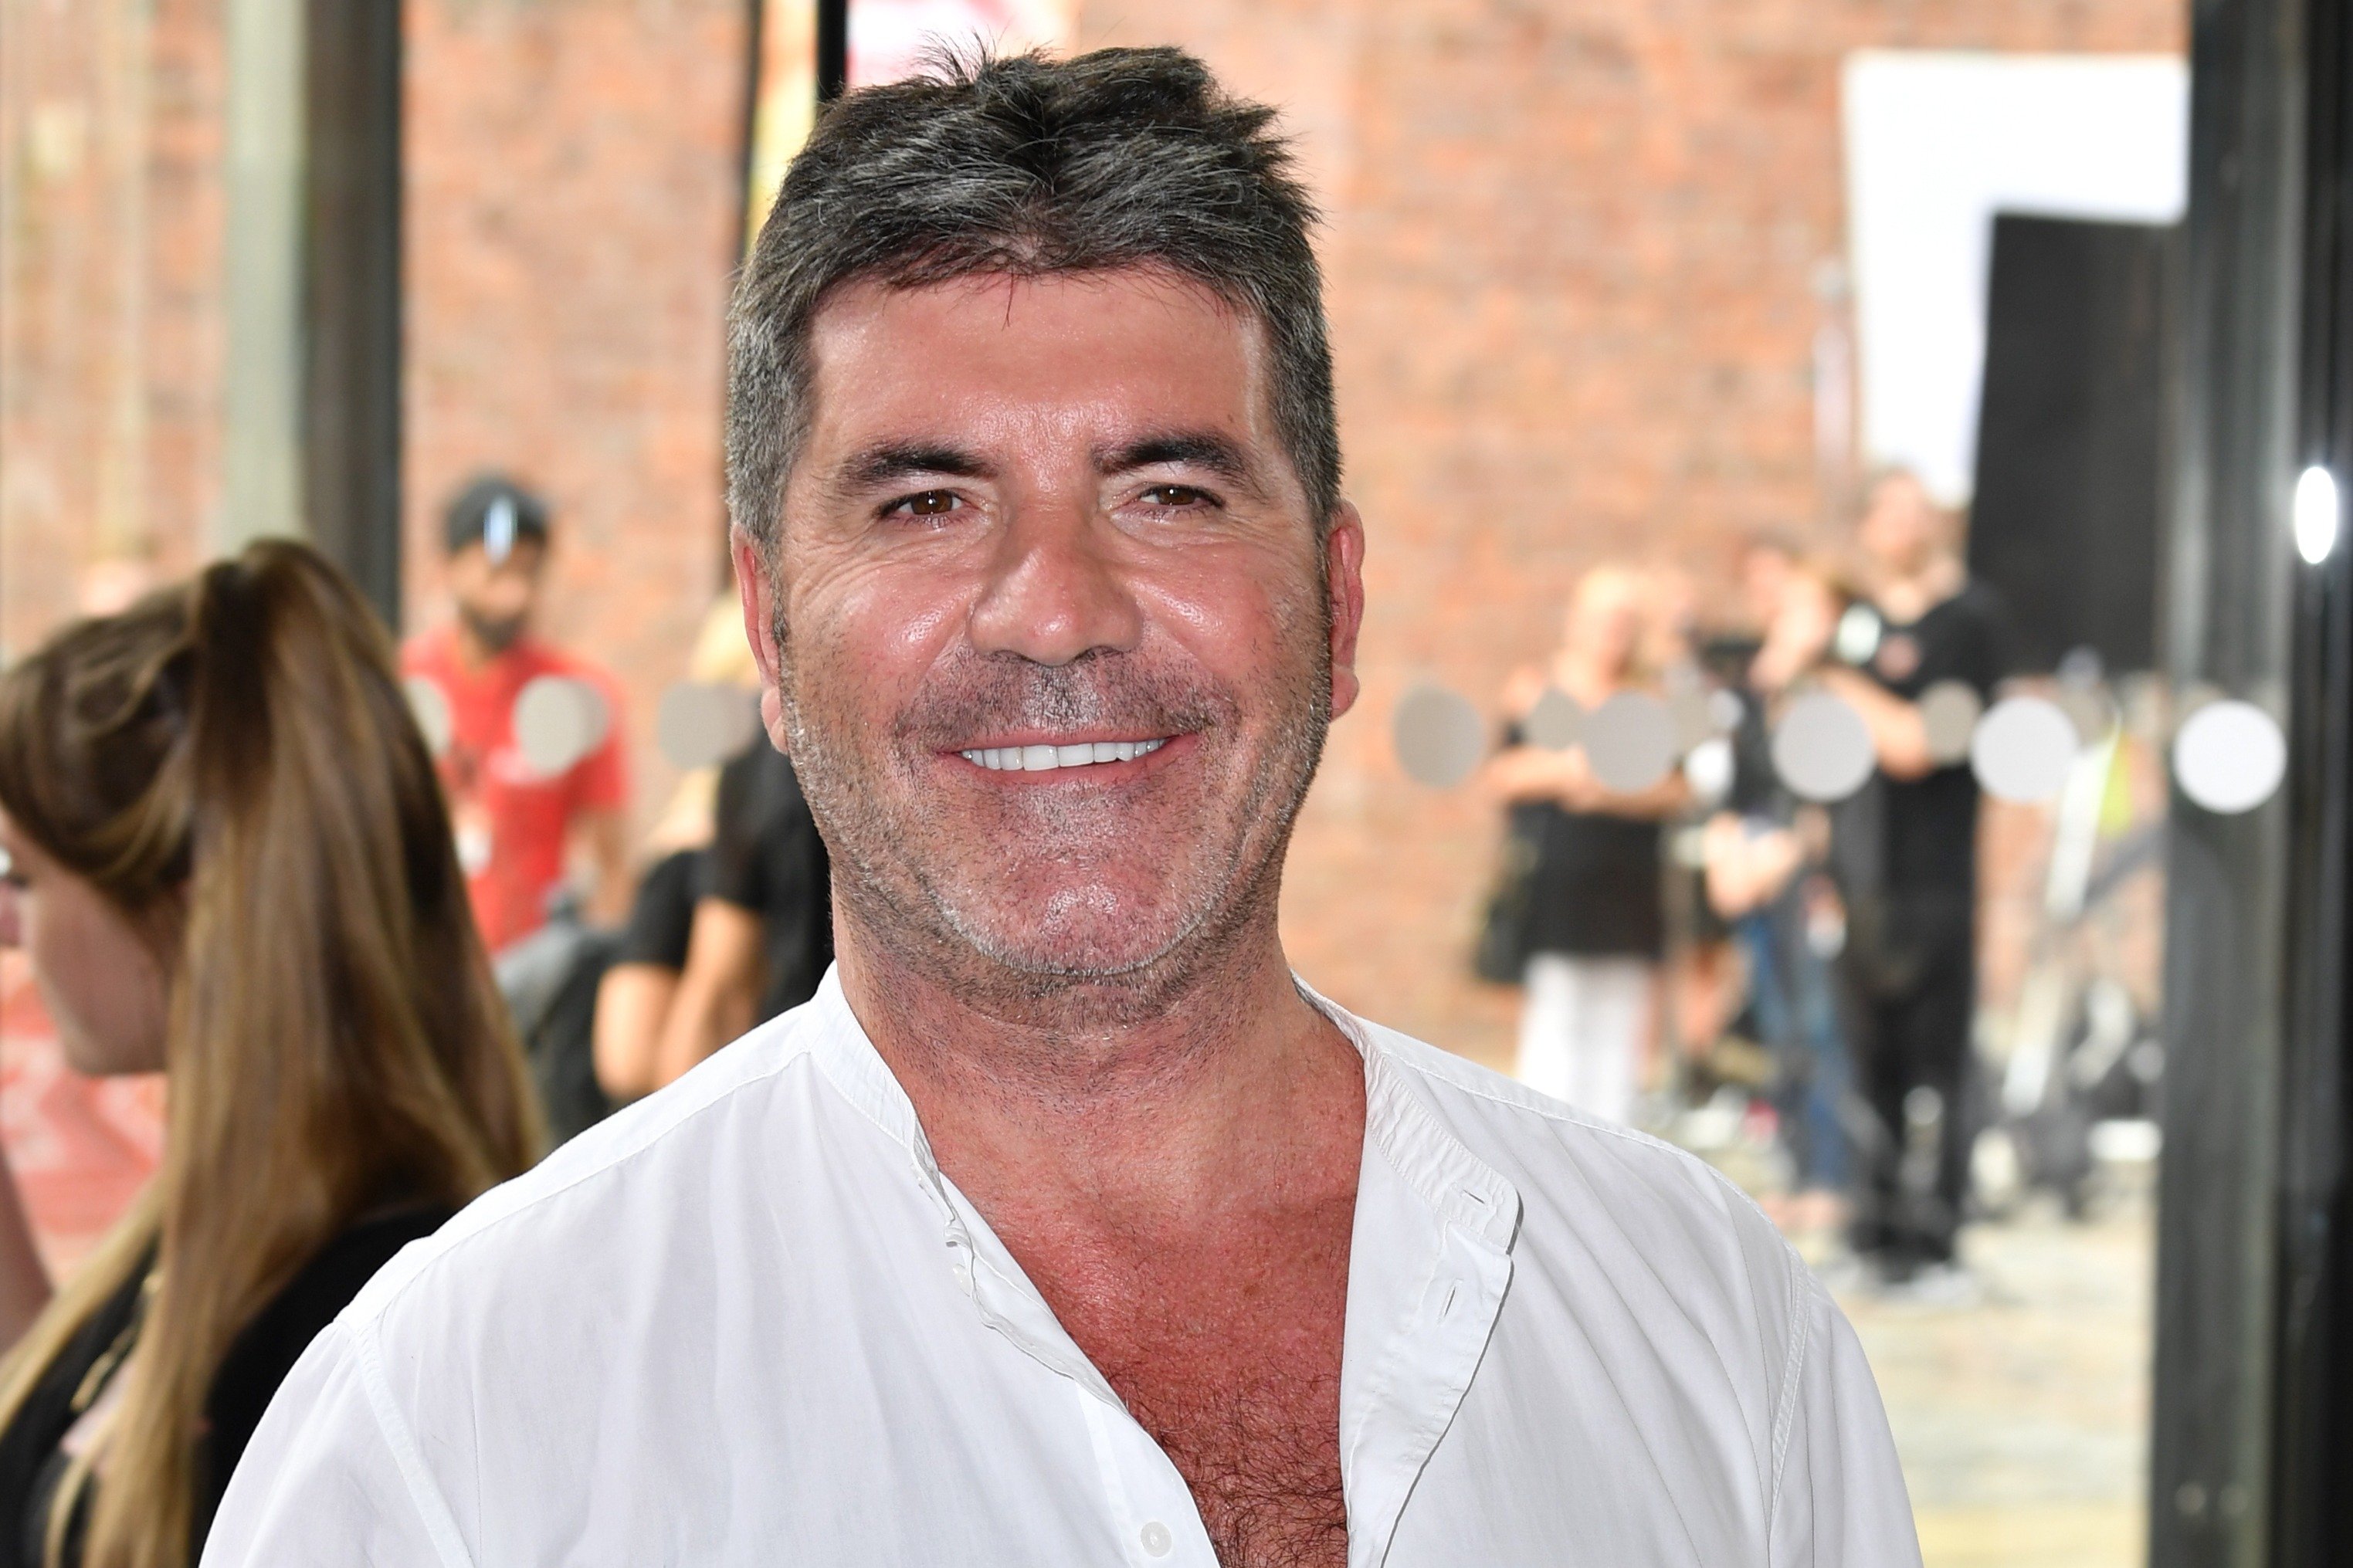 Music producer Simon Cowell attends the first day of the "X-Factor" auditions at the Titanic Hotel in Liverpool, England on June 20, 2017. | Photo: Getty Images